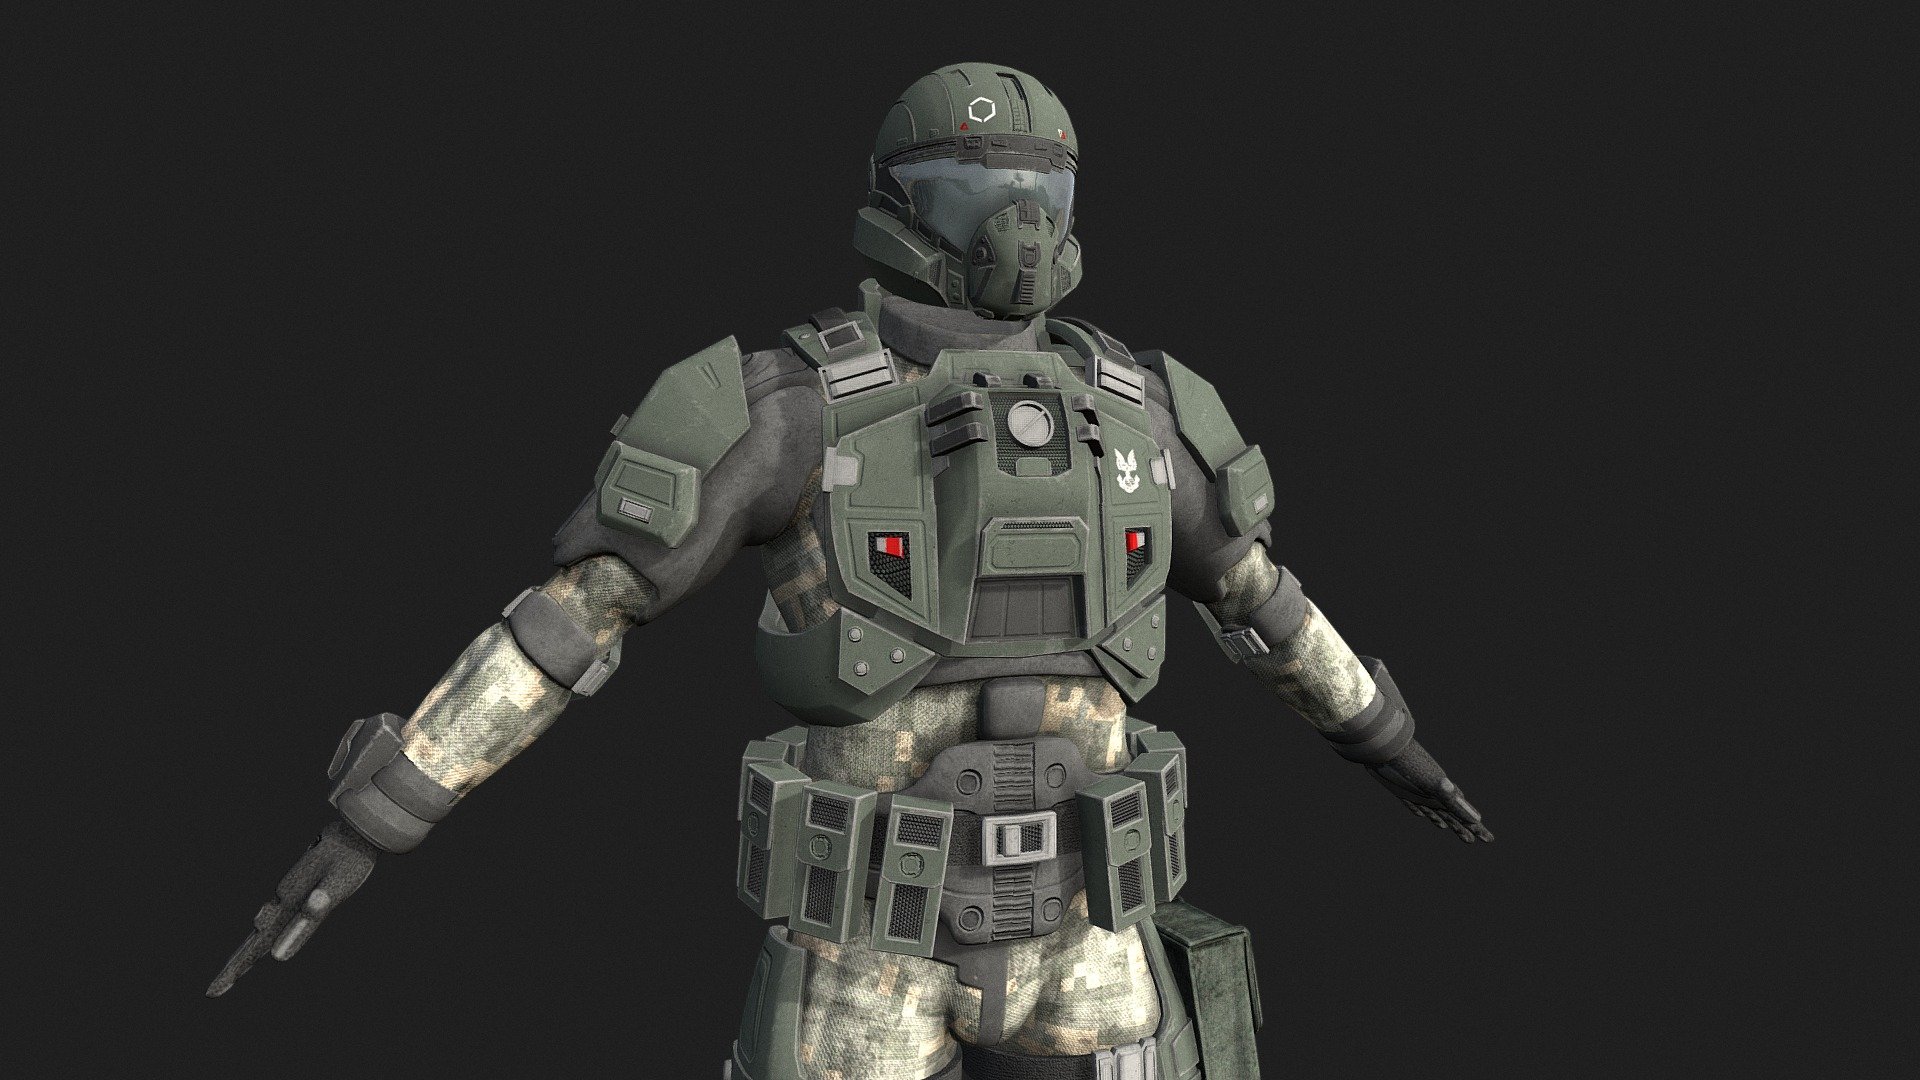 Halo 3 UNSC Pilot inspired from Halo 3 - Model/Art by Outworld Studios

Must give credit to Outworld Studios if using this asset

Show support by joining my discord: https://discord.gg/EgWSkp8Cxn - Halo 3 UNSC Pilot - Buy Royalty Free 3D model by Outworld Studios (@outworldstudios) 3d model